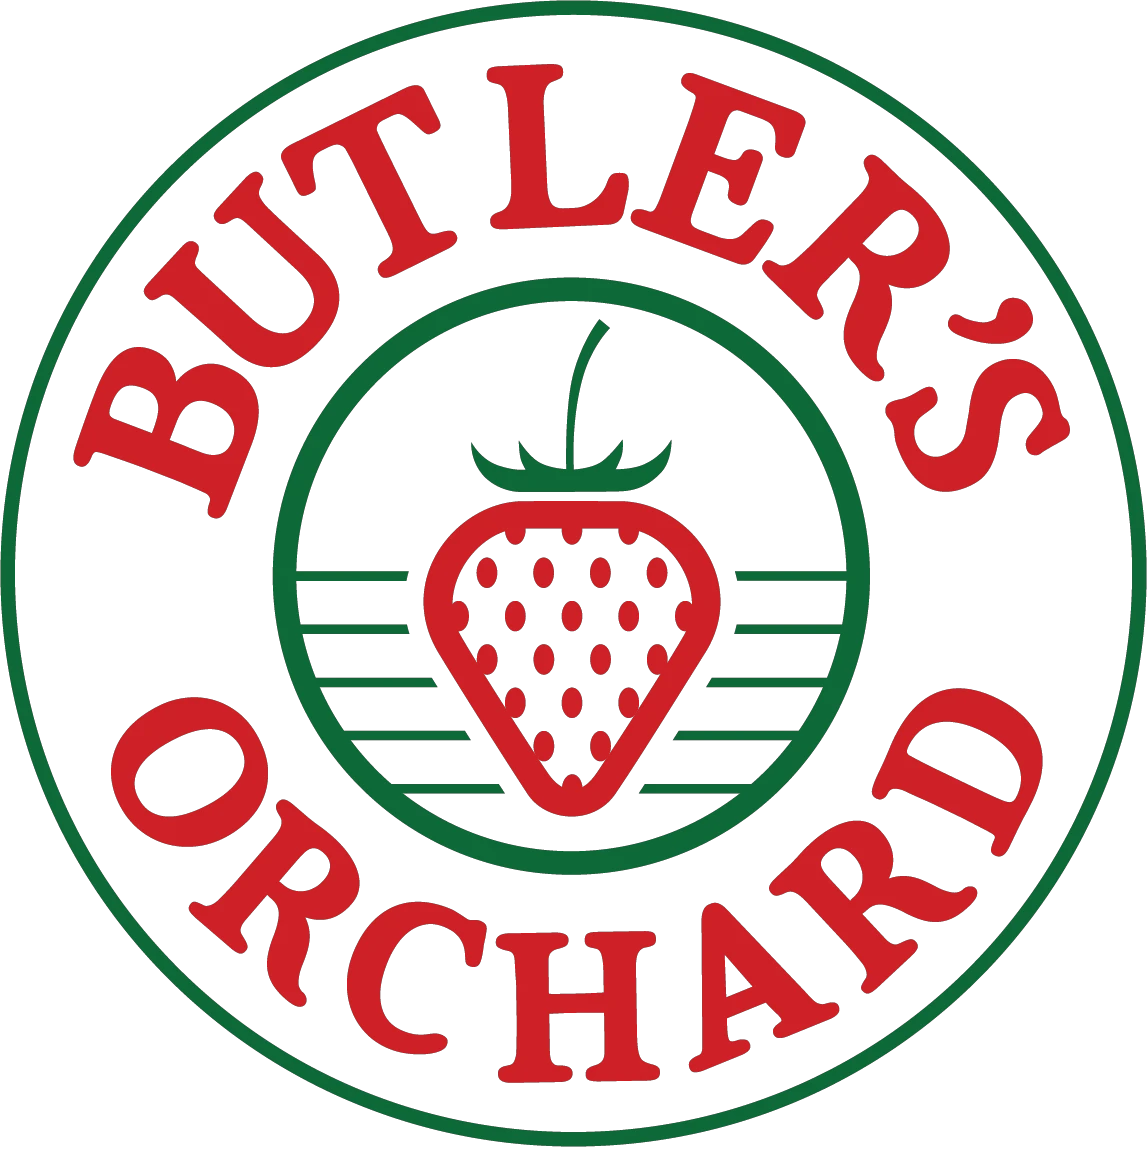 Butler's Orchard